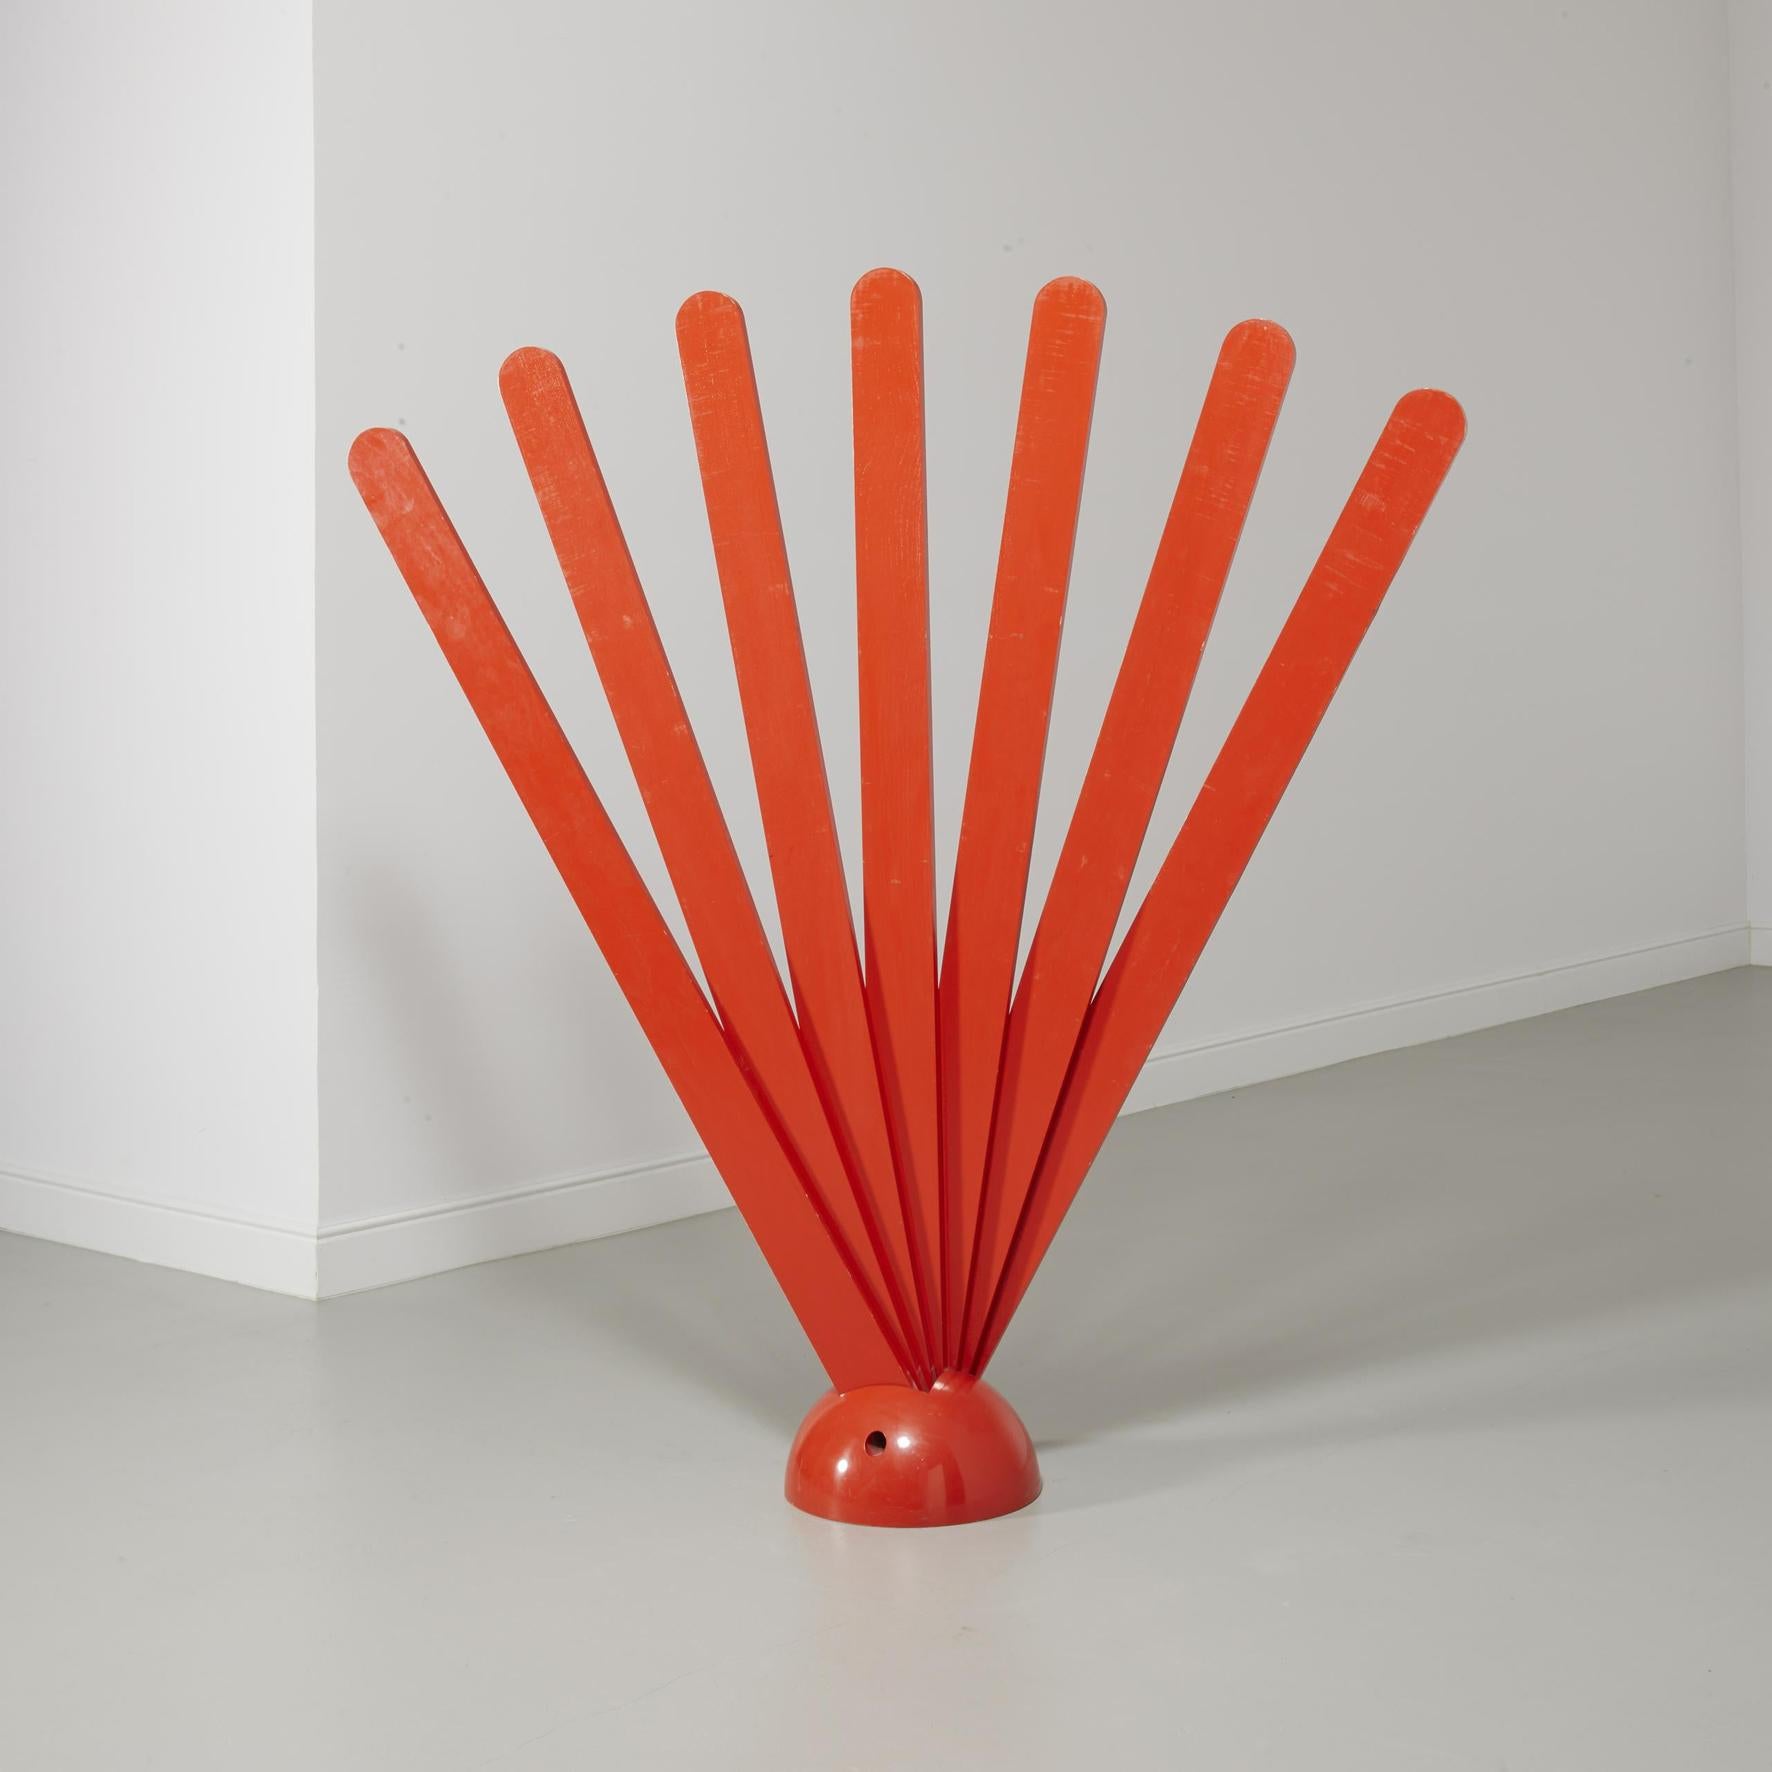 A red lacquered coat hanger made of seven adjustable and foldable stems on a half spherical base.
Produced by Tarzia.
Candolo, Italy,
circa 1975.


Literature :
Domus n°546, May 1975, p.45.